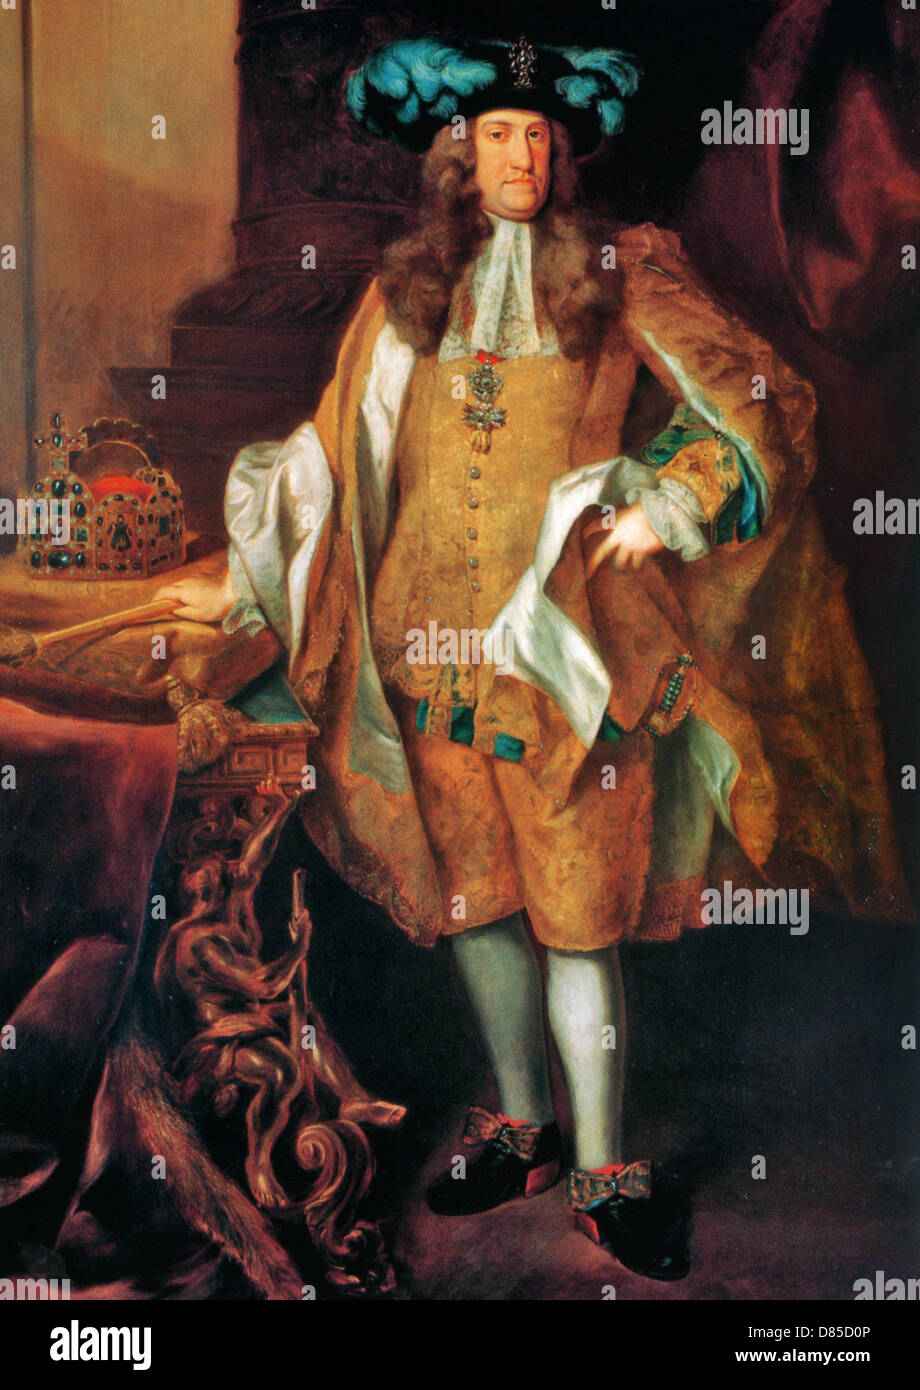 CHARLES VI, Holy Roman Emperor (1685-1740)  painted by Johann Gottfried Auerbach about 1735 Stock Photo